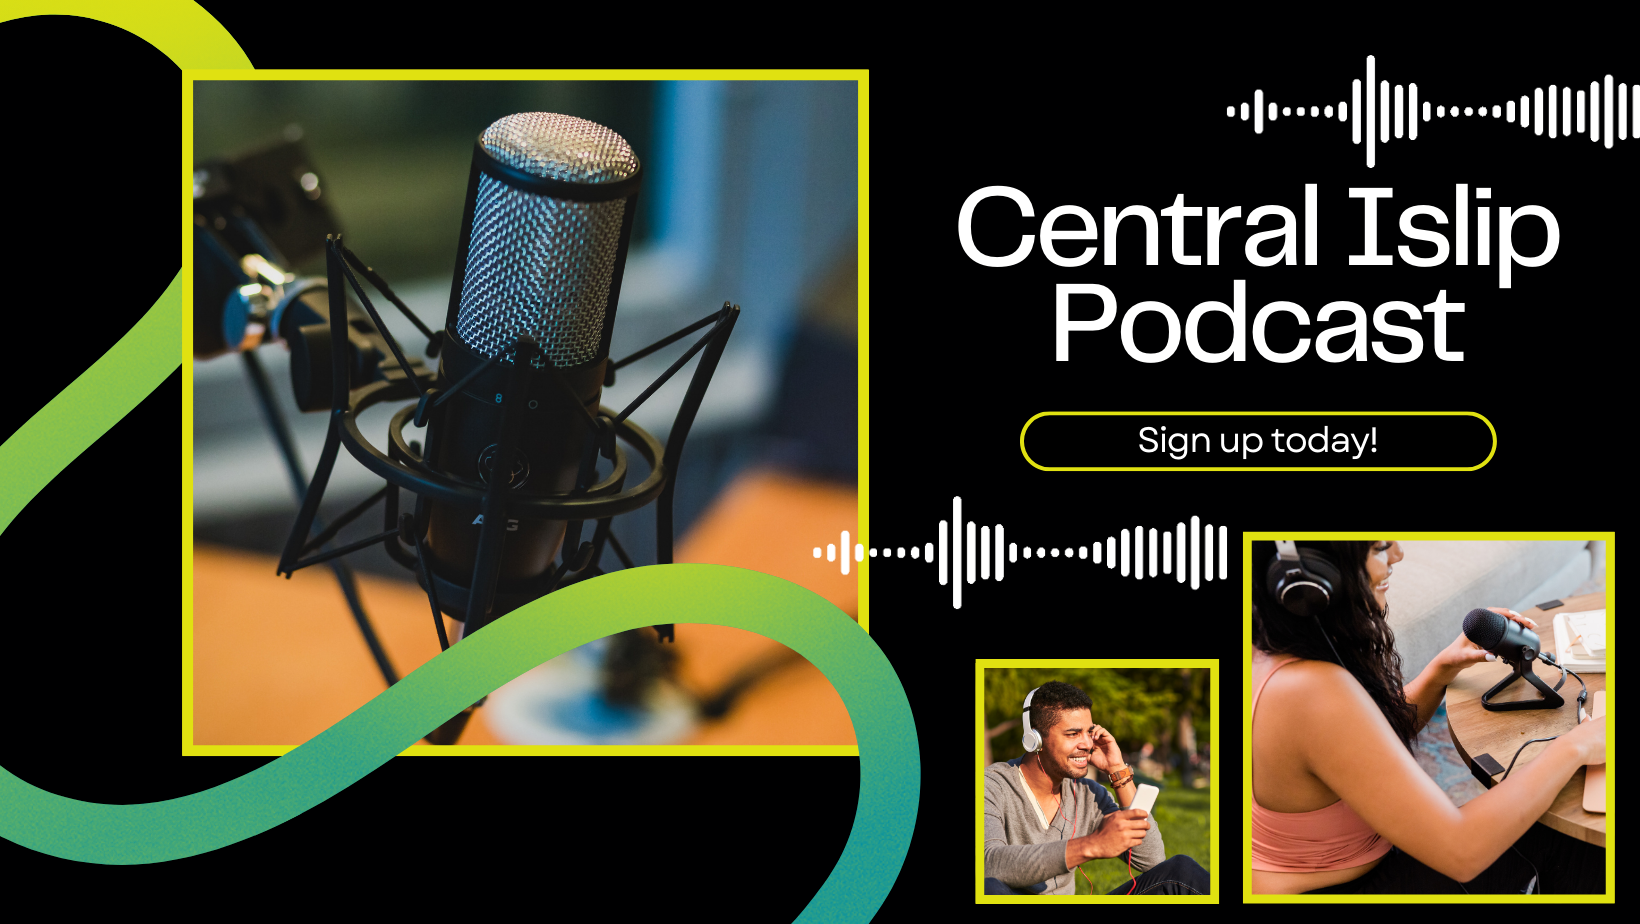 Central Islip Podcasting Club, Sign up today